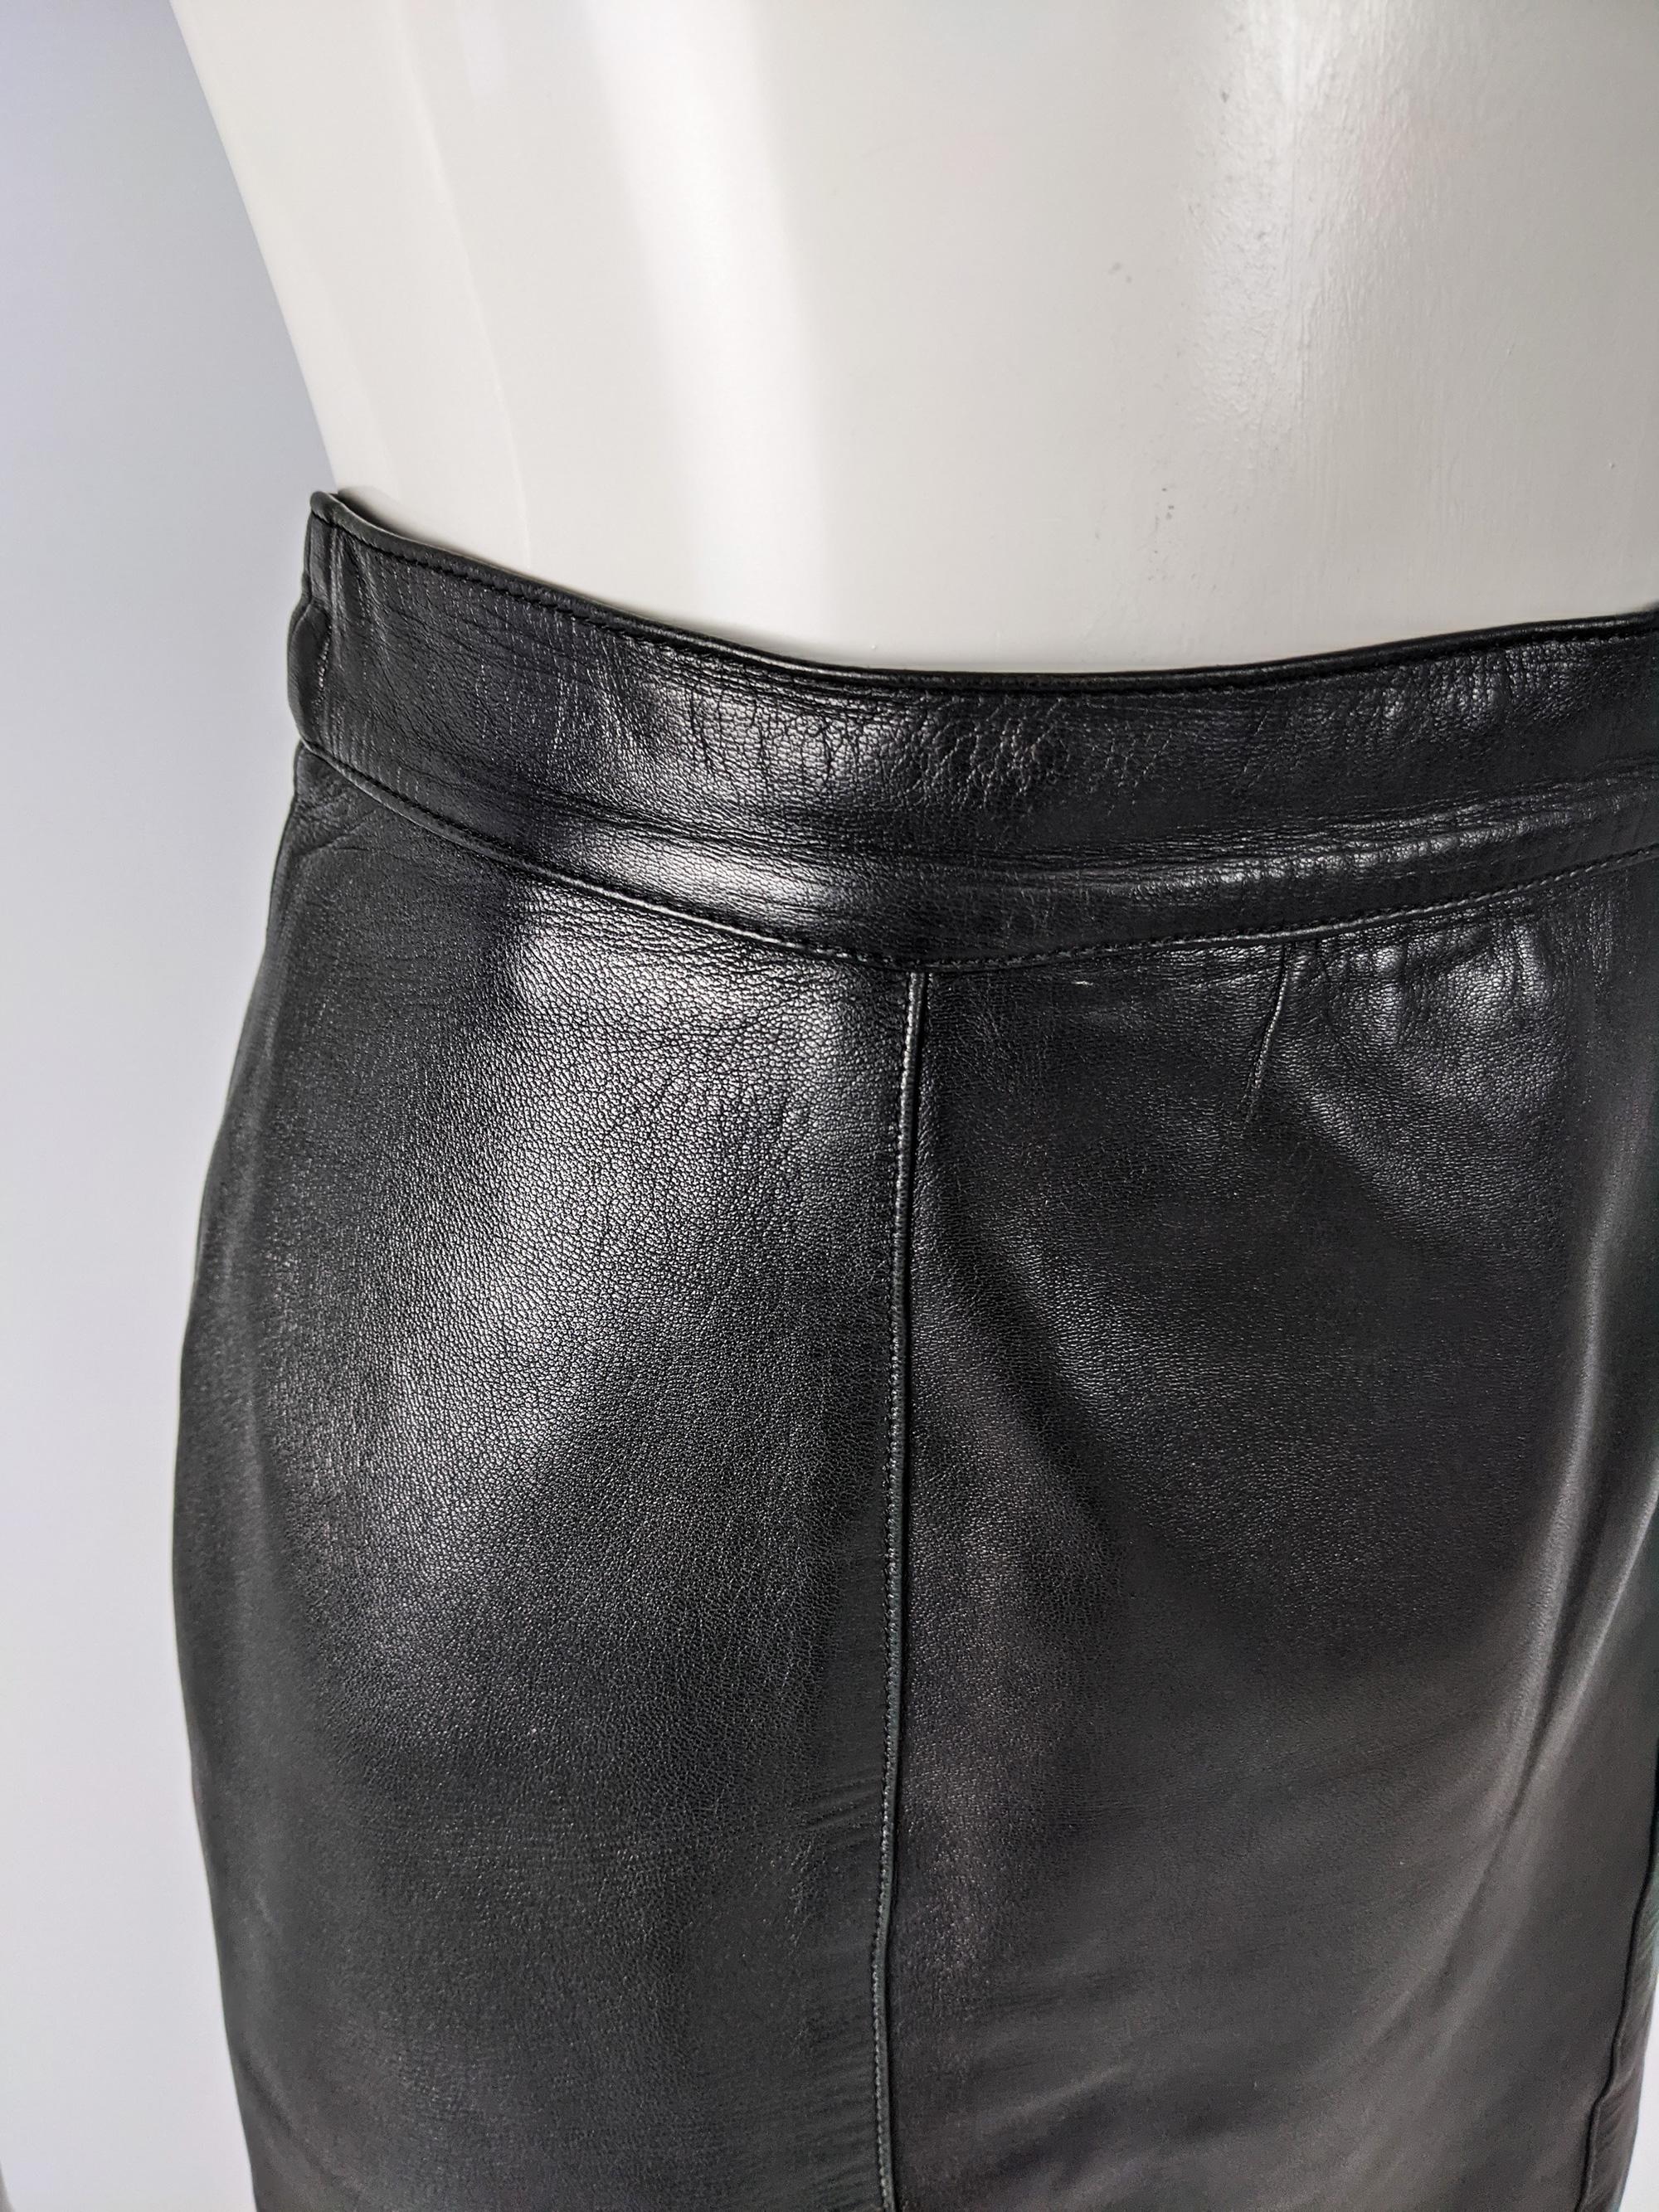 1980s leather skirt